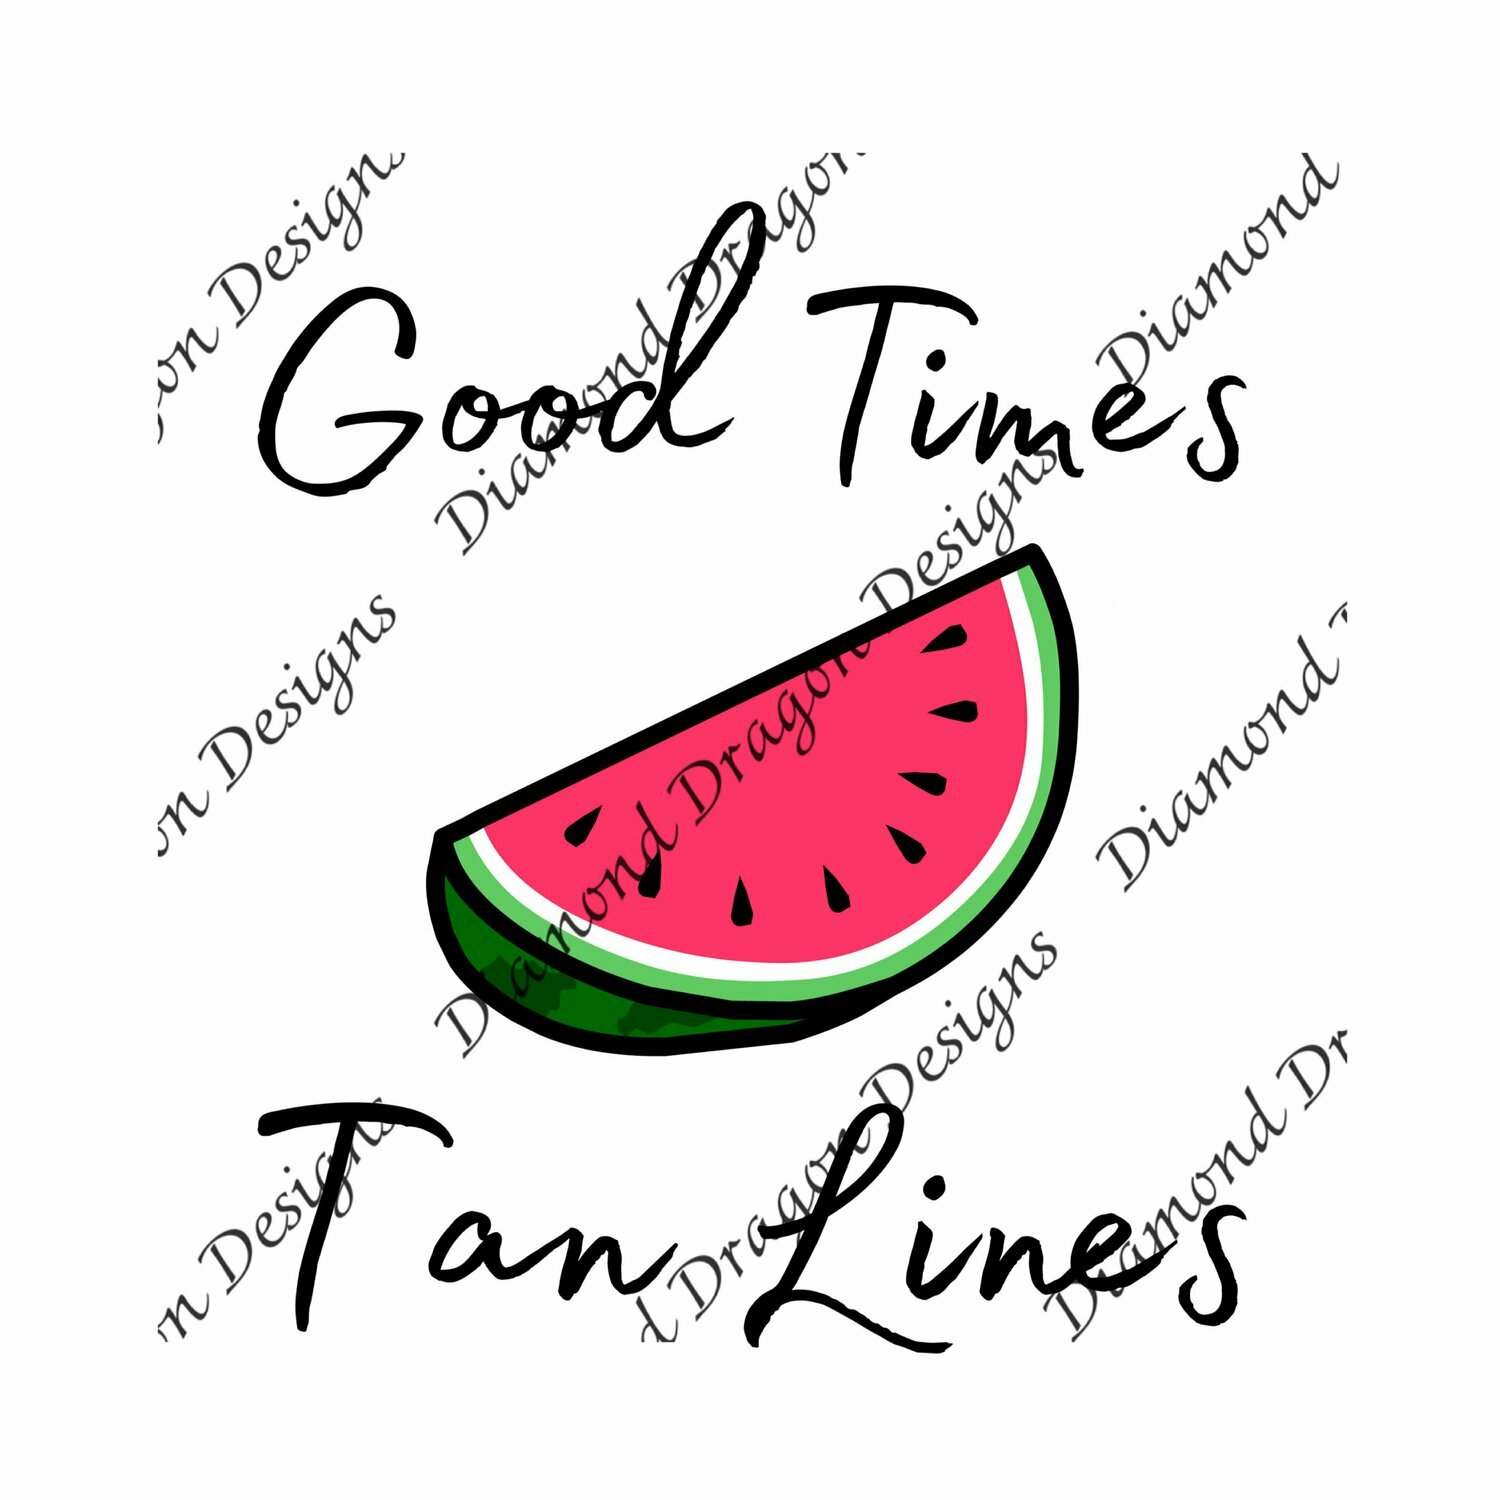 Watermelon - Summer, Summer time, Good Time Tan Lines, Quote, Watermelon Slice, Waterslide